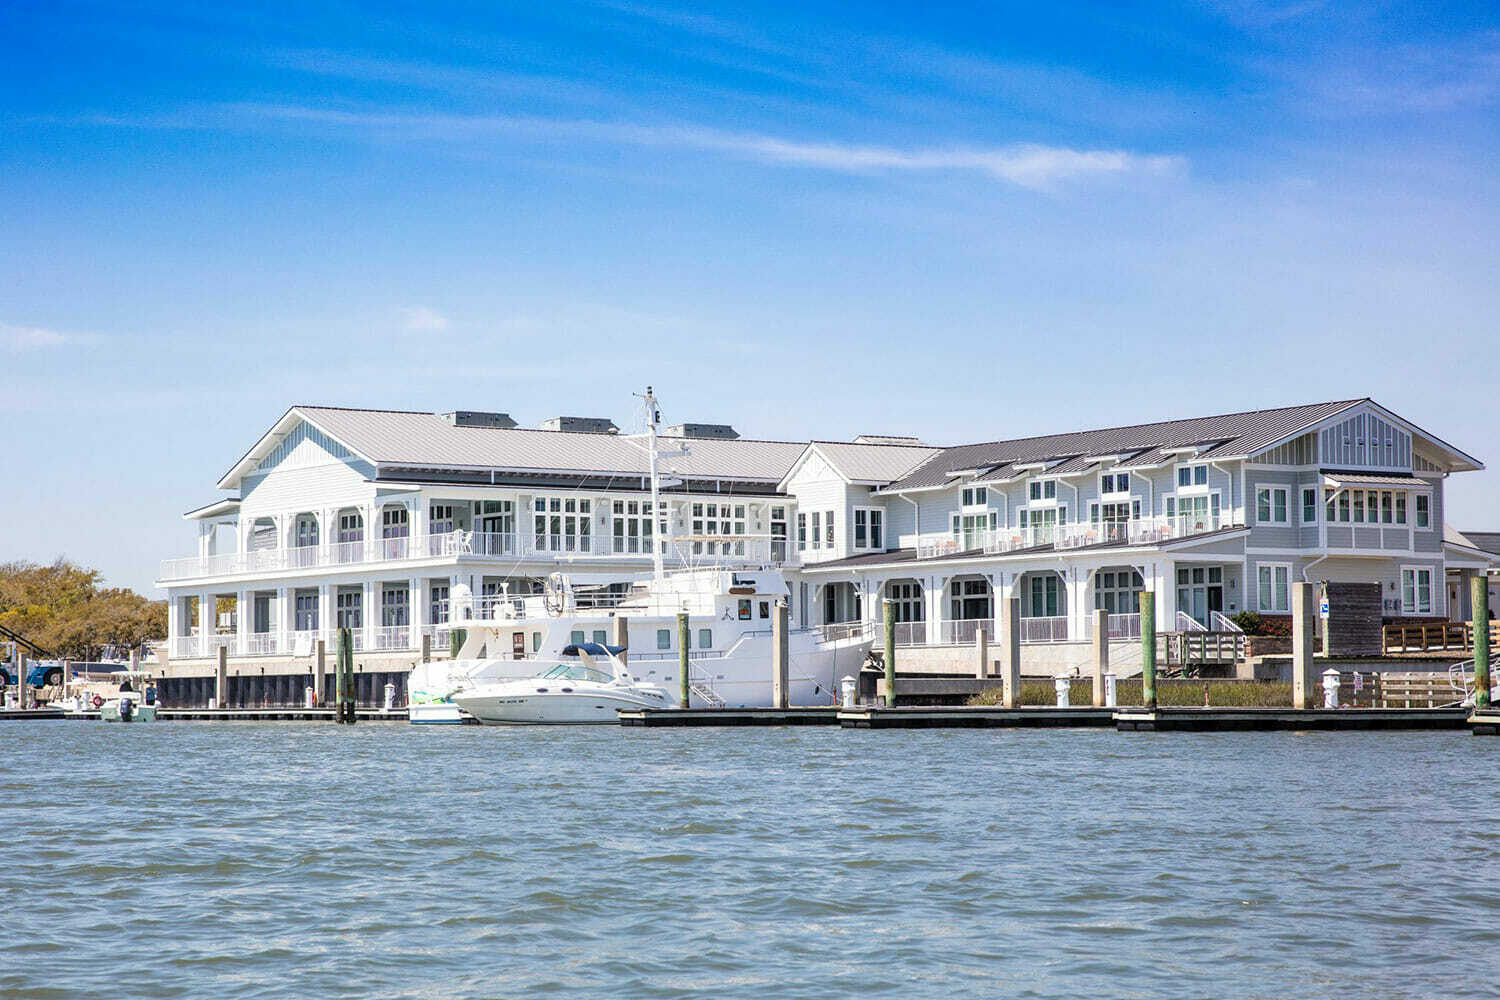 Photo of The Beaufort Hotel, Beaufort, NC